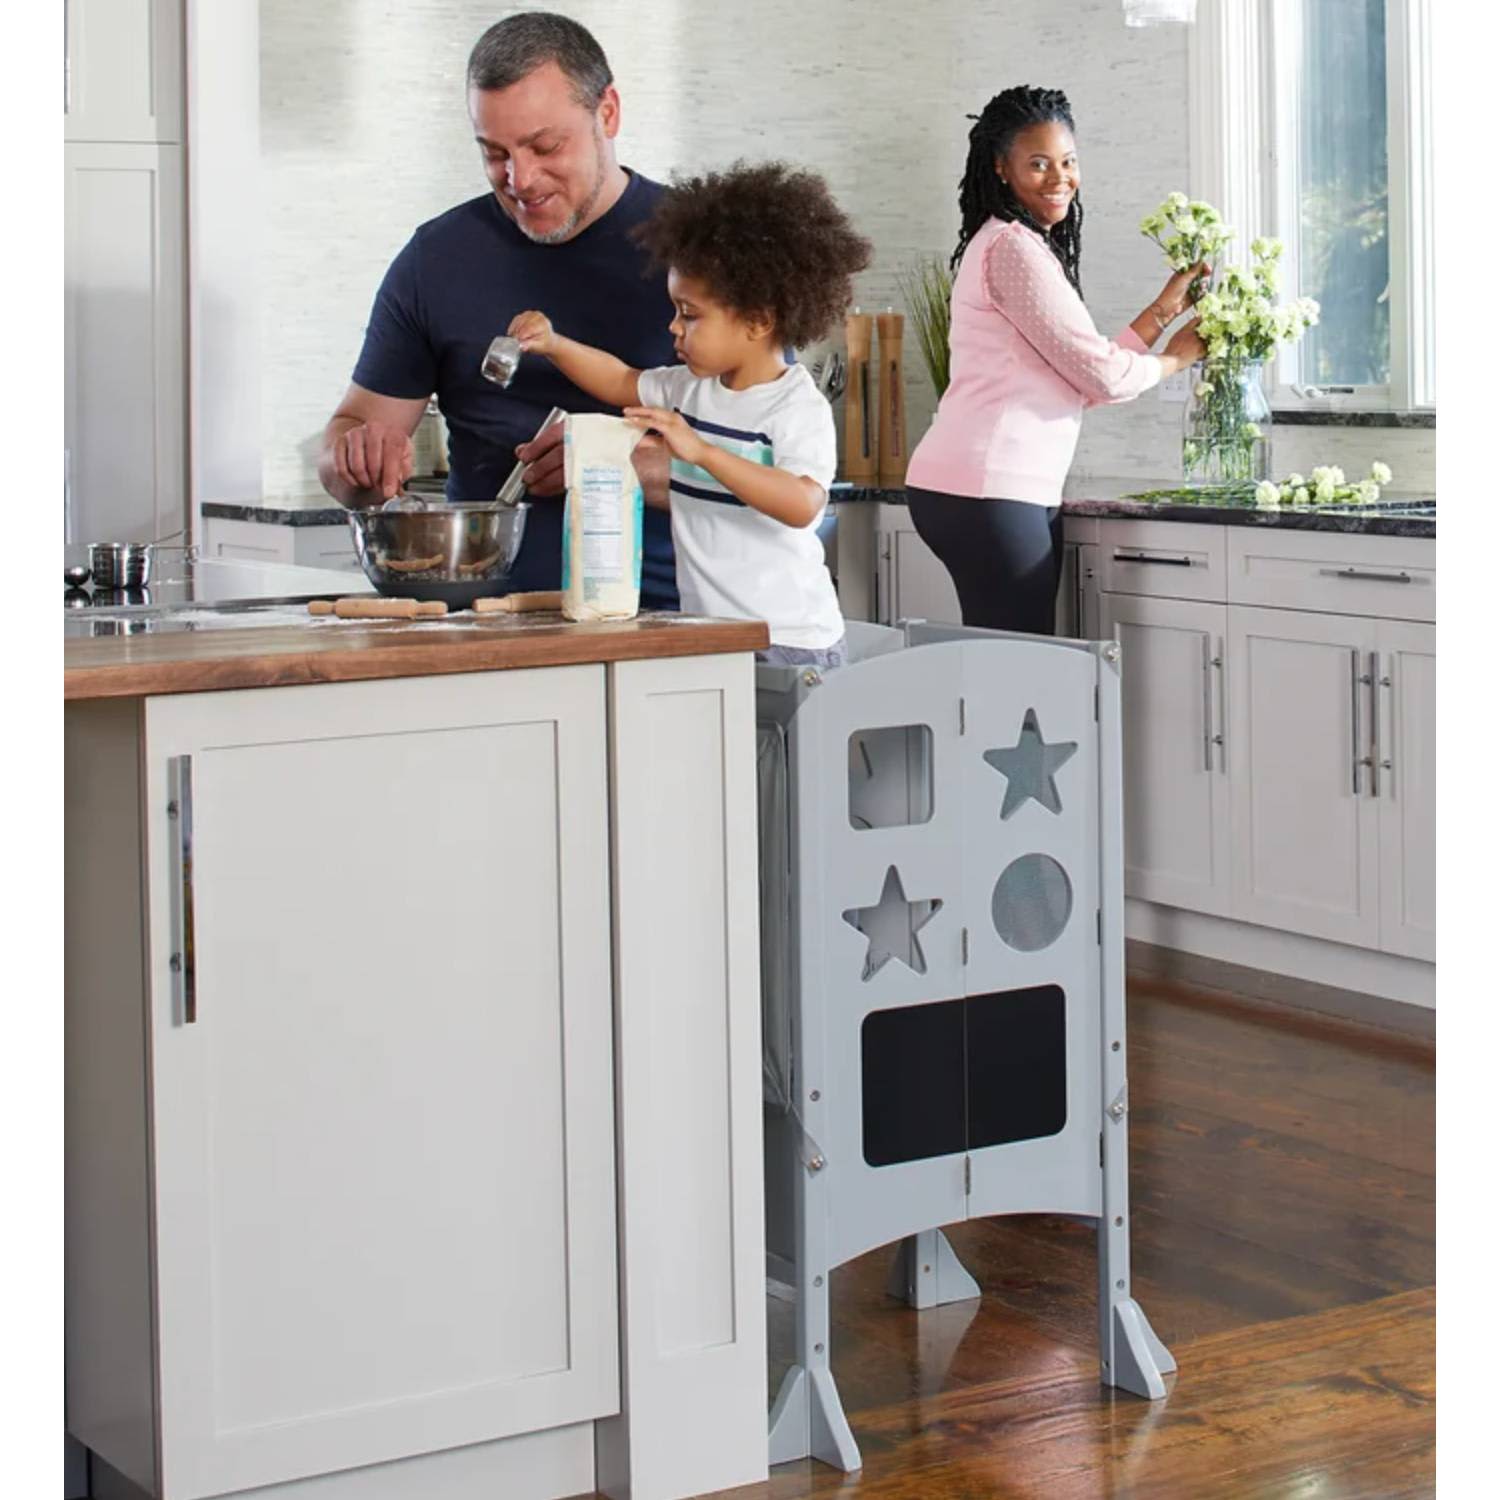 Kitchen Buddy 2 in 1 Stool Review, Walmart - Core Pacific Kitchen Helper  Toddler Review